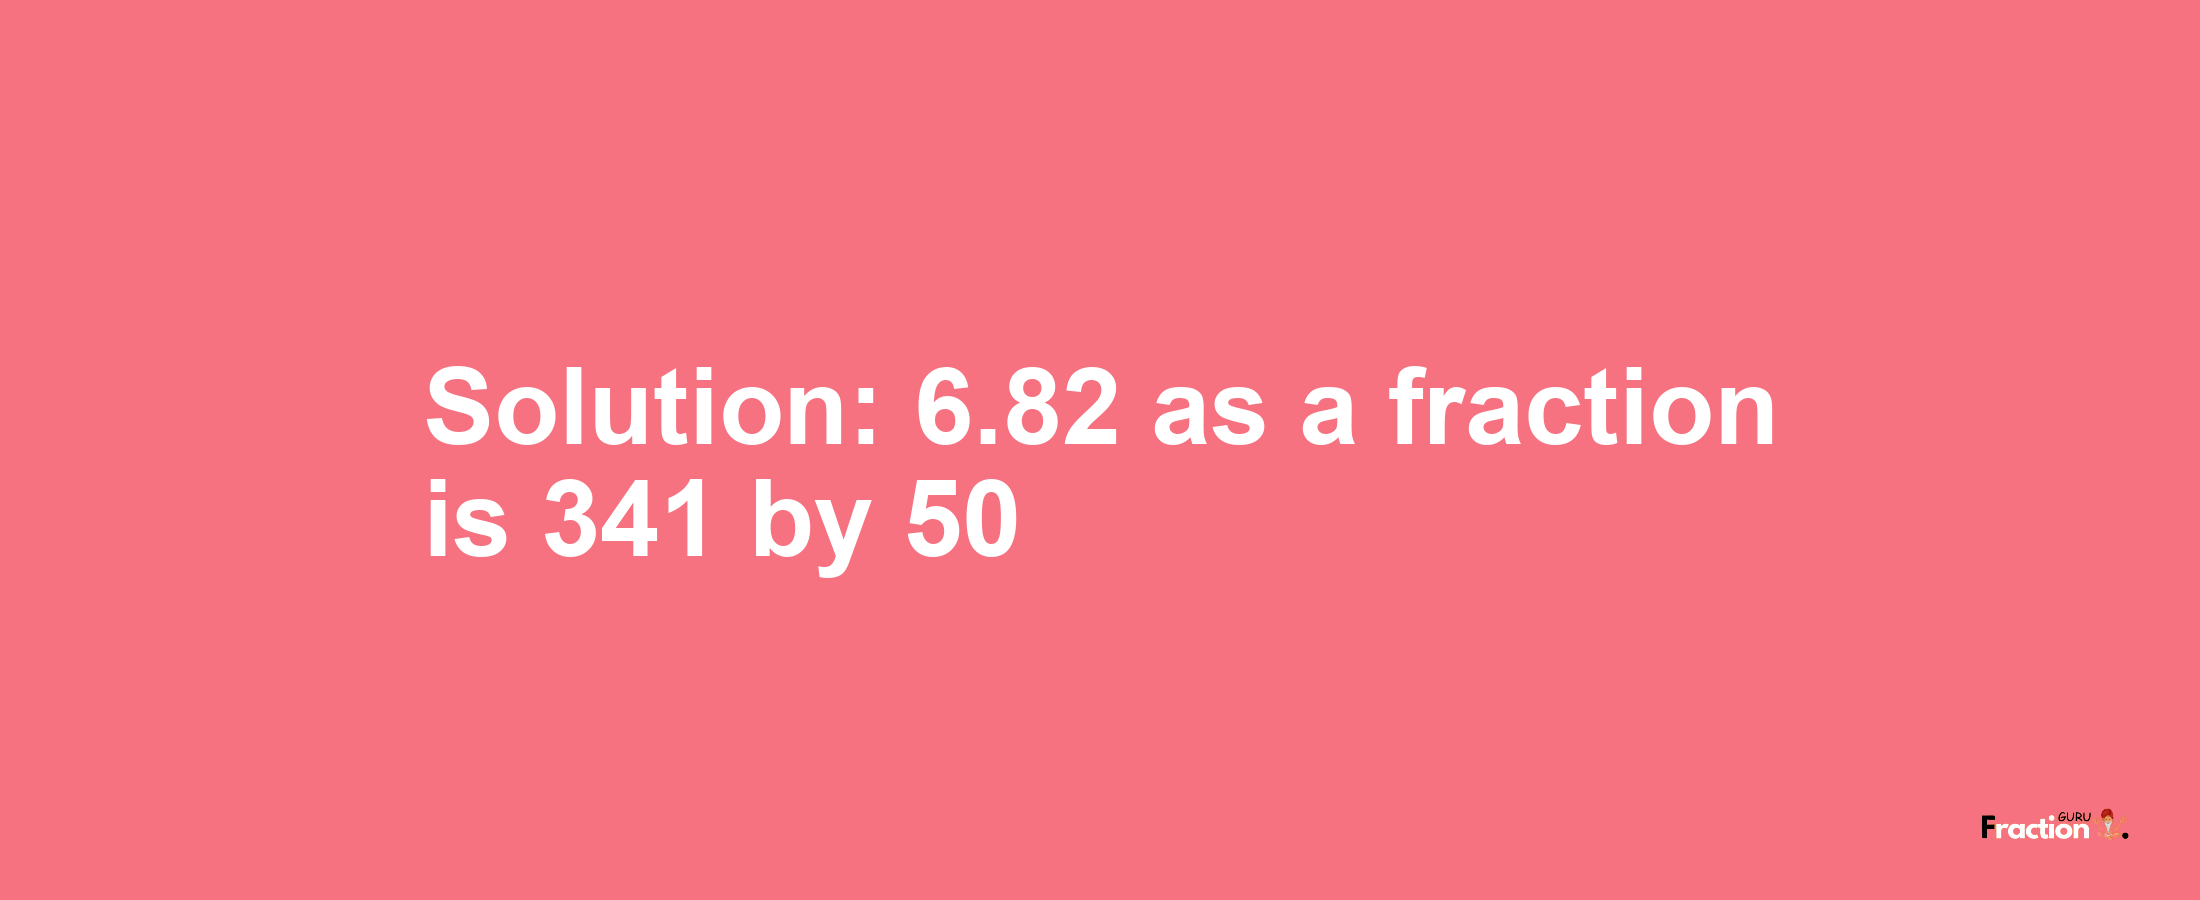 Solution:6.82 as a fraction is 341/50